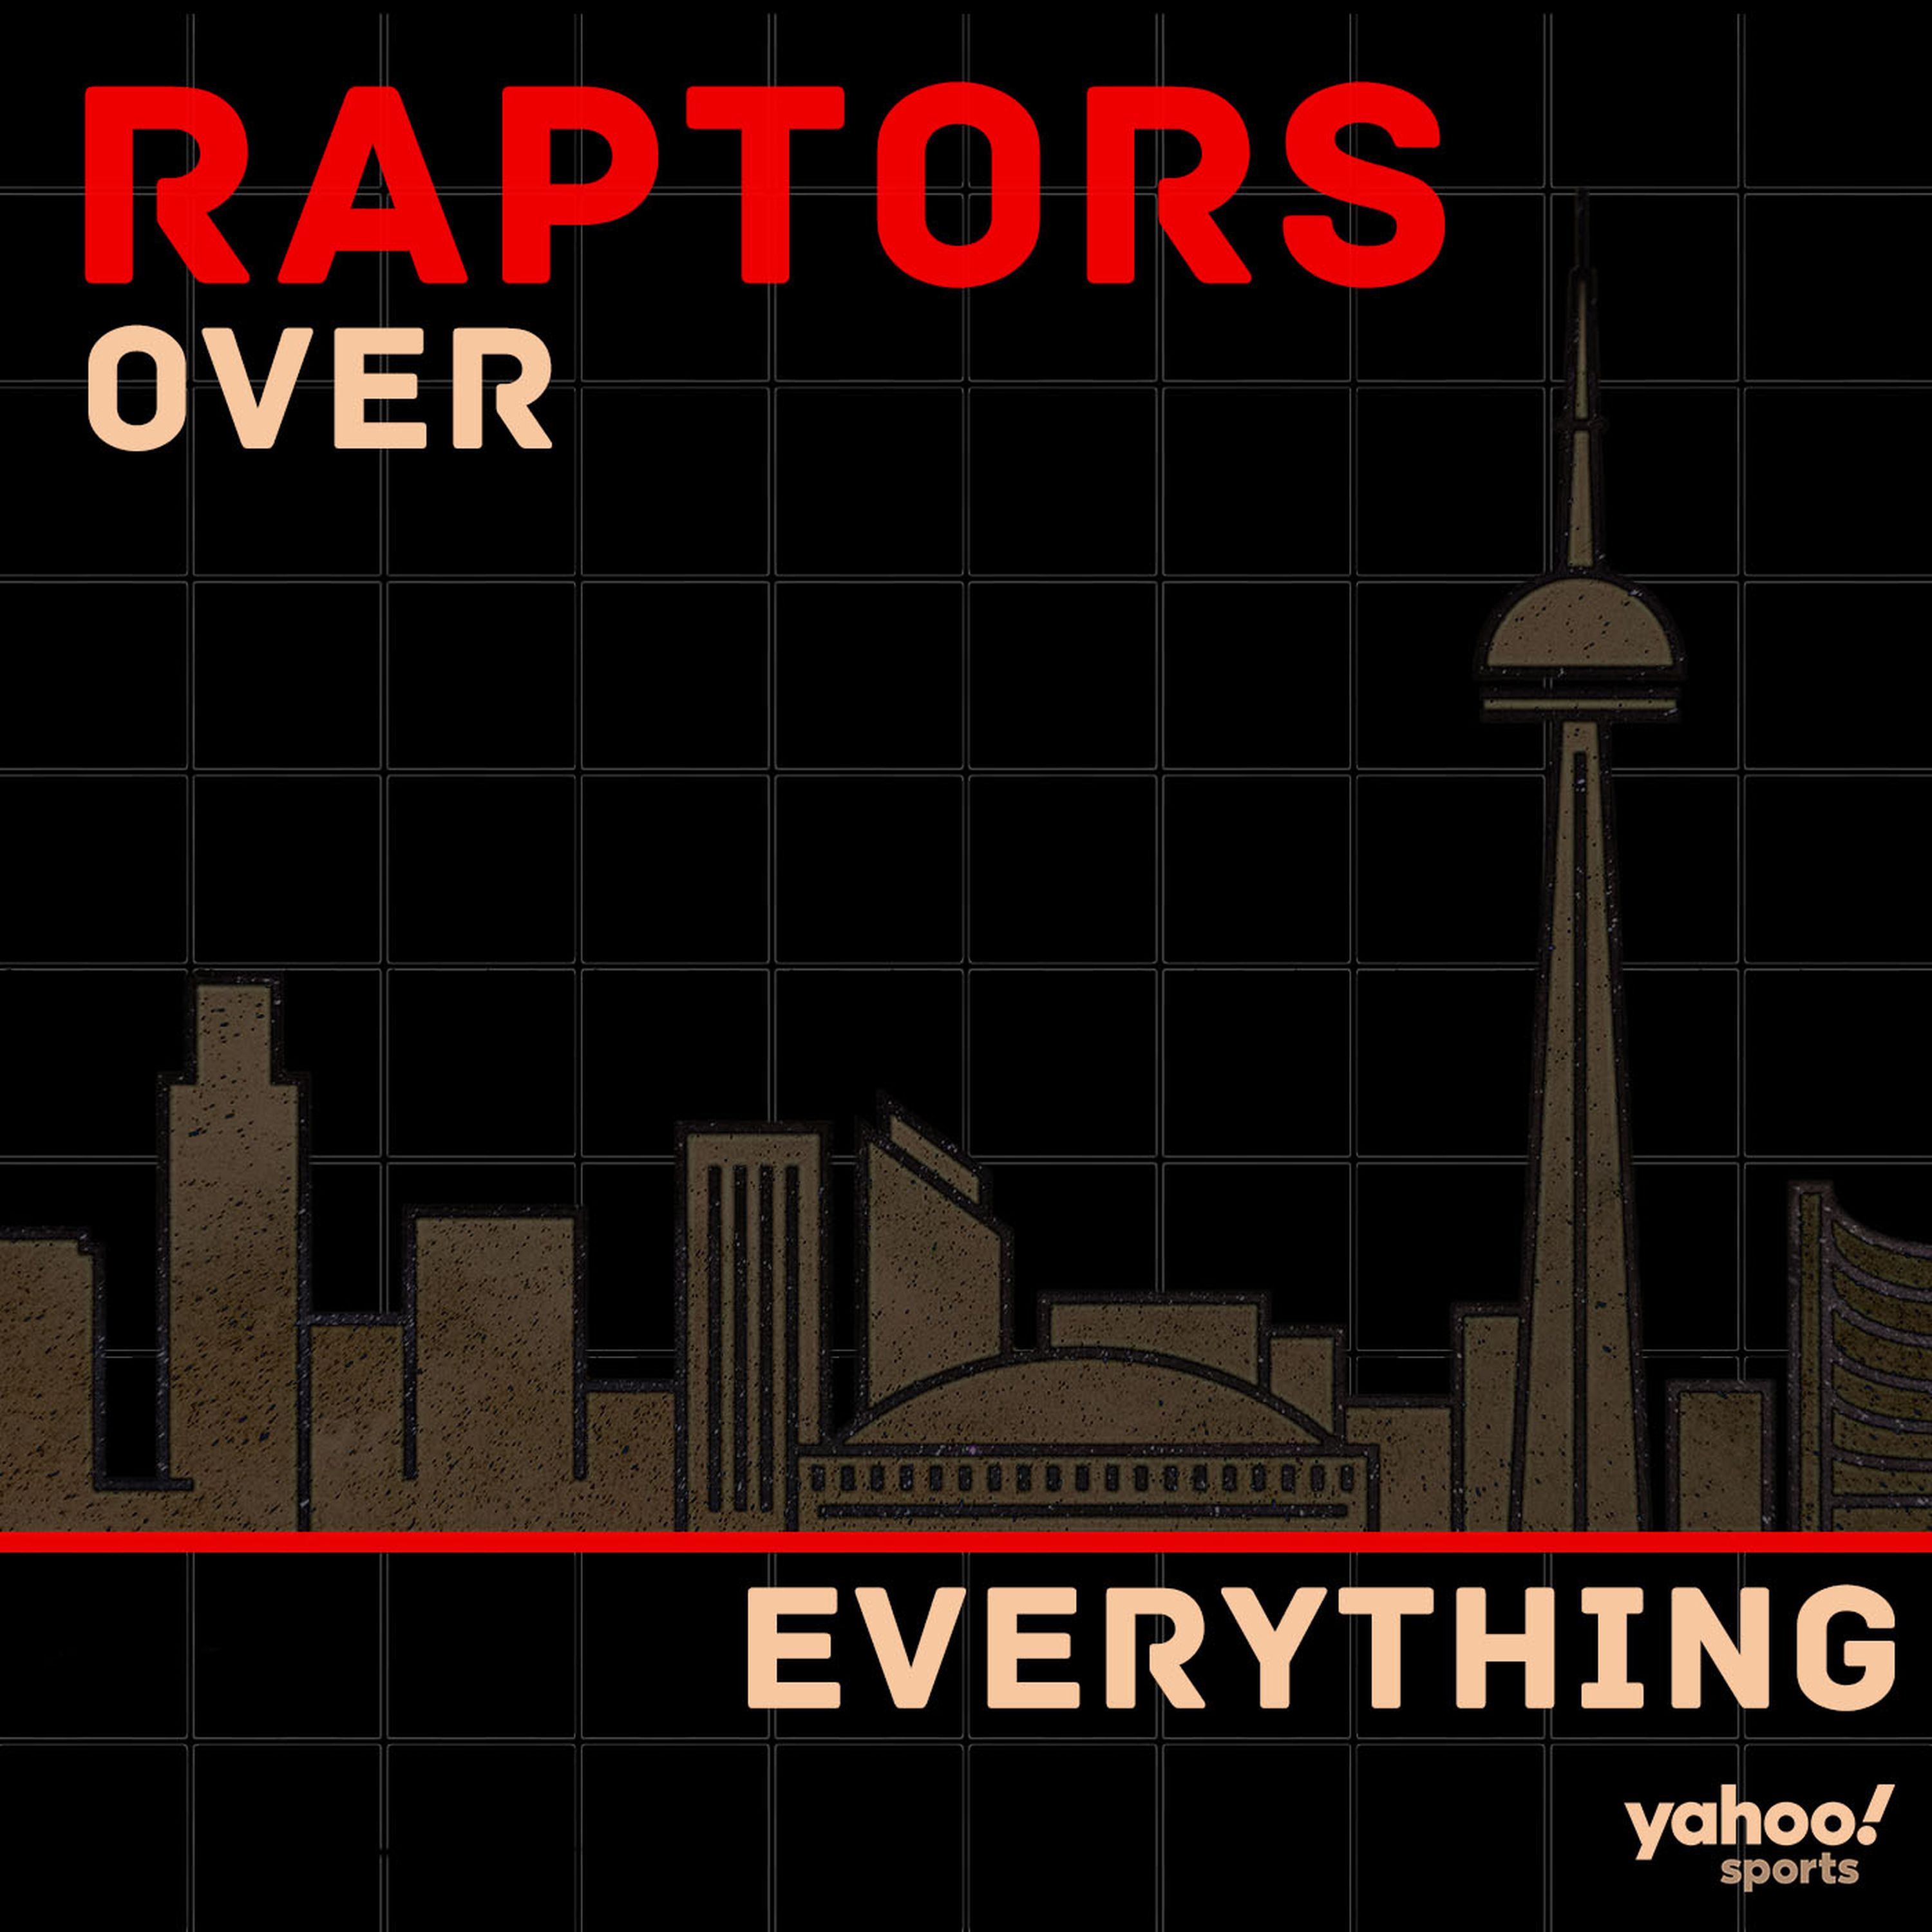 Twitter mailbag: What's wrong with the Raptors after their 0-2 start, and trade targets